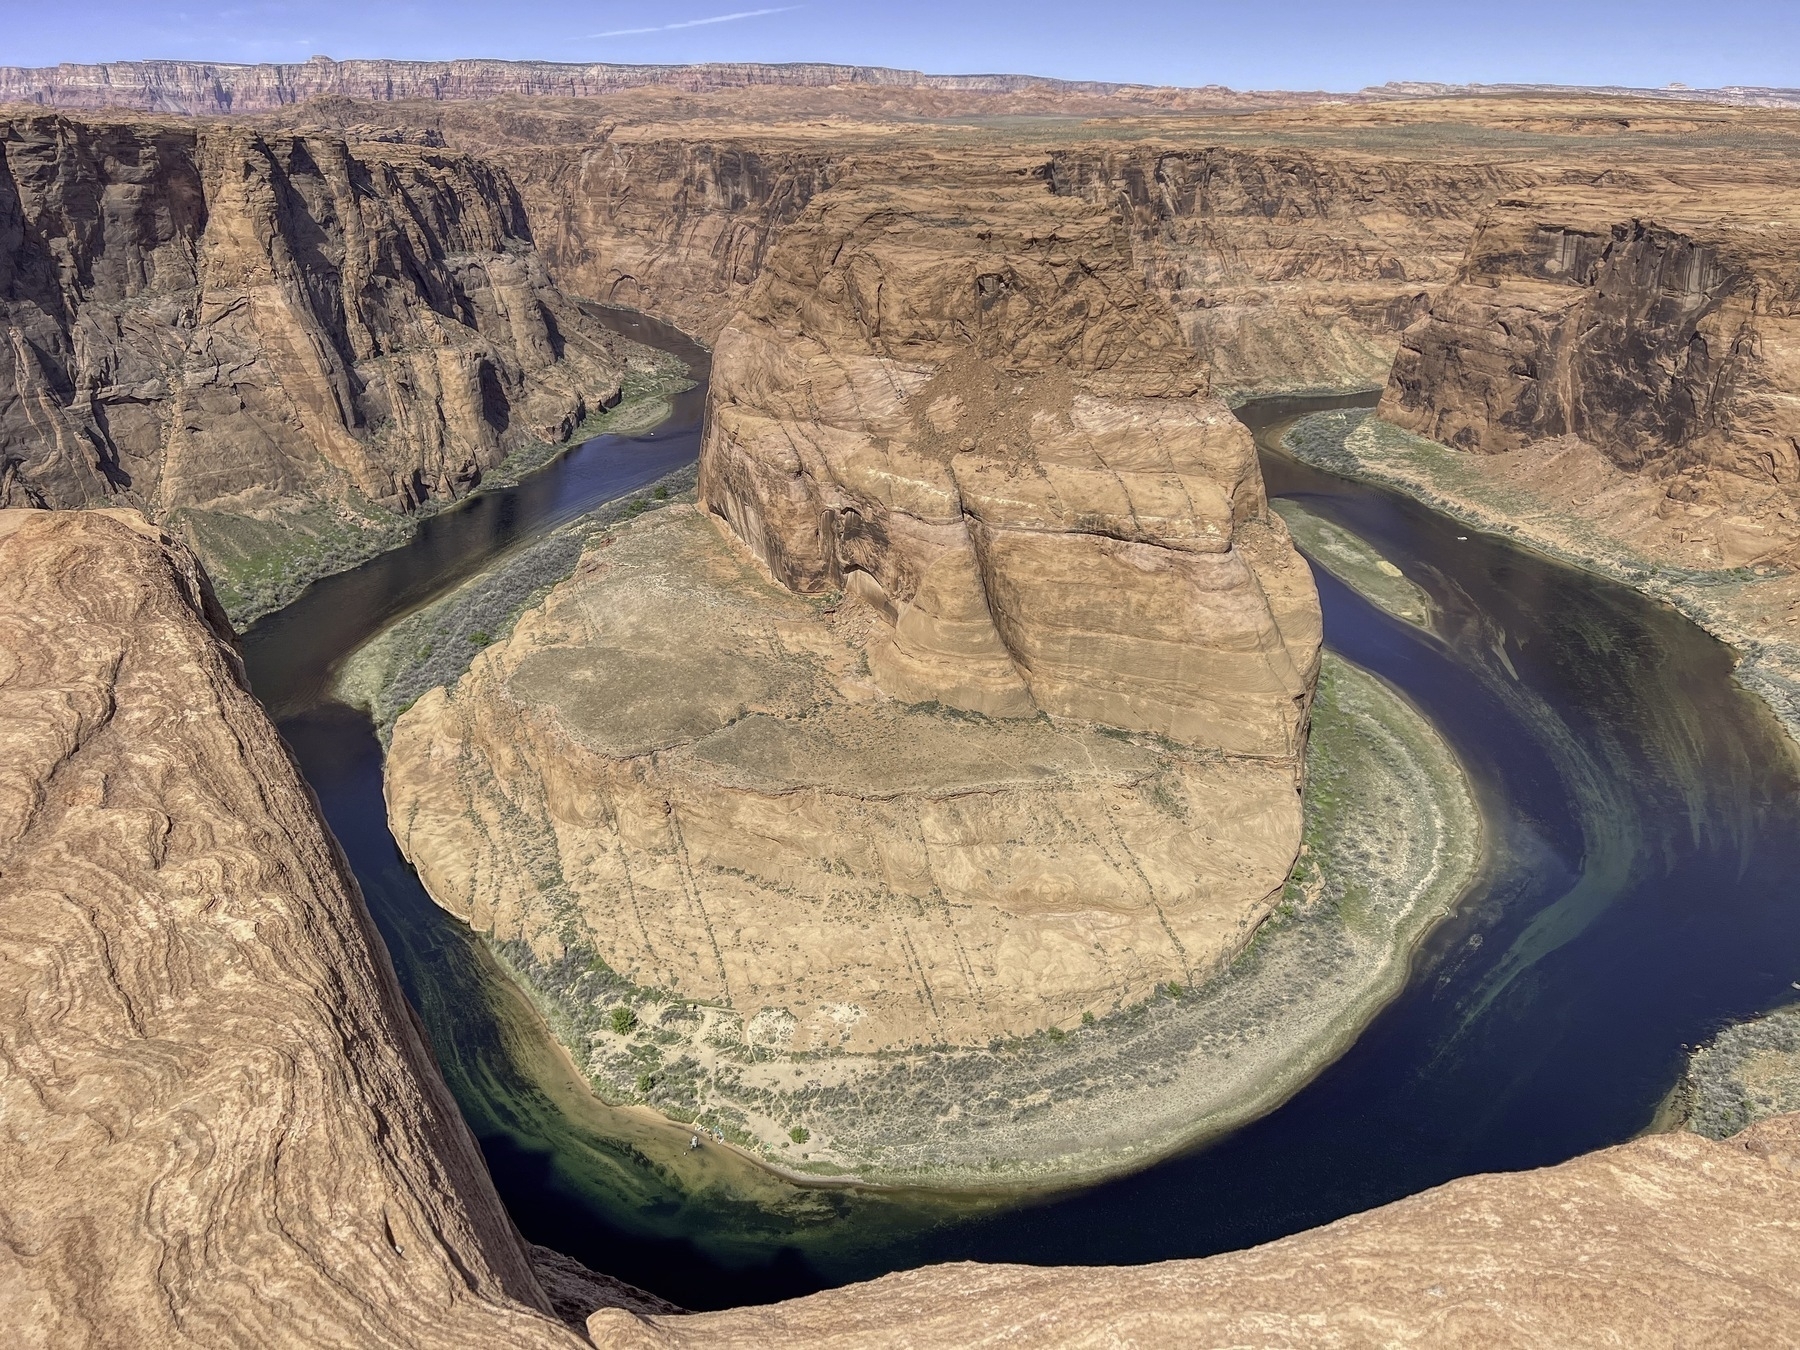 Horseshoe Bend in Arizona - the Colorado River incised a deep gorge in the red sandstone and has created a big looping bed in the foreground.